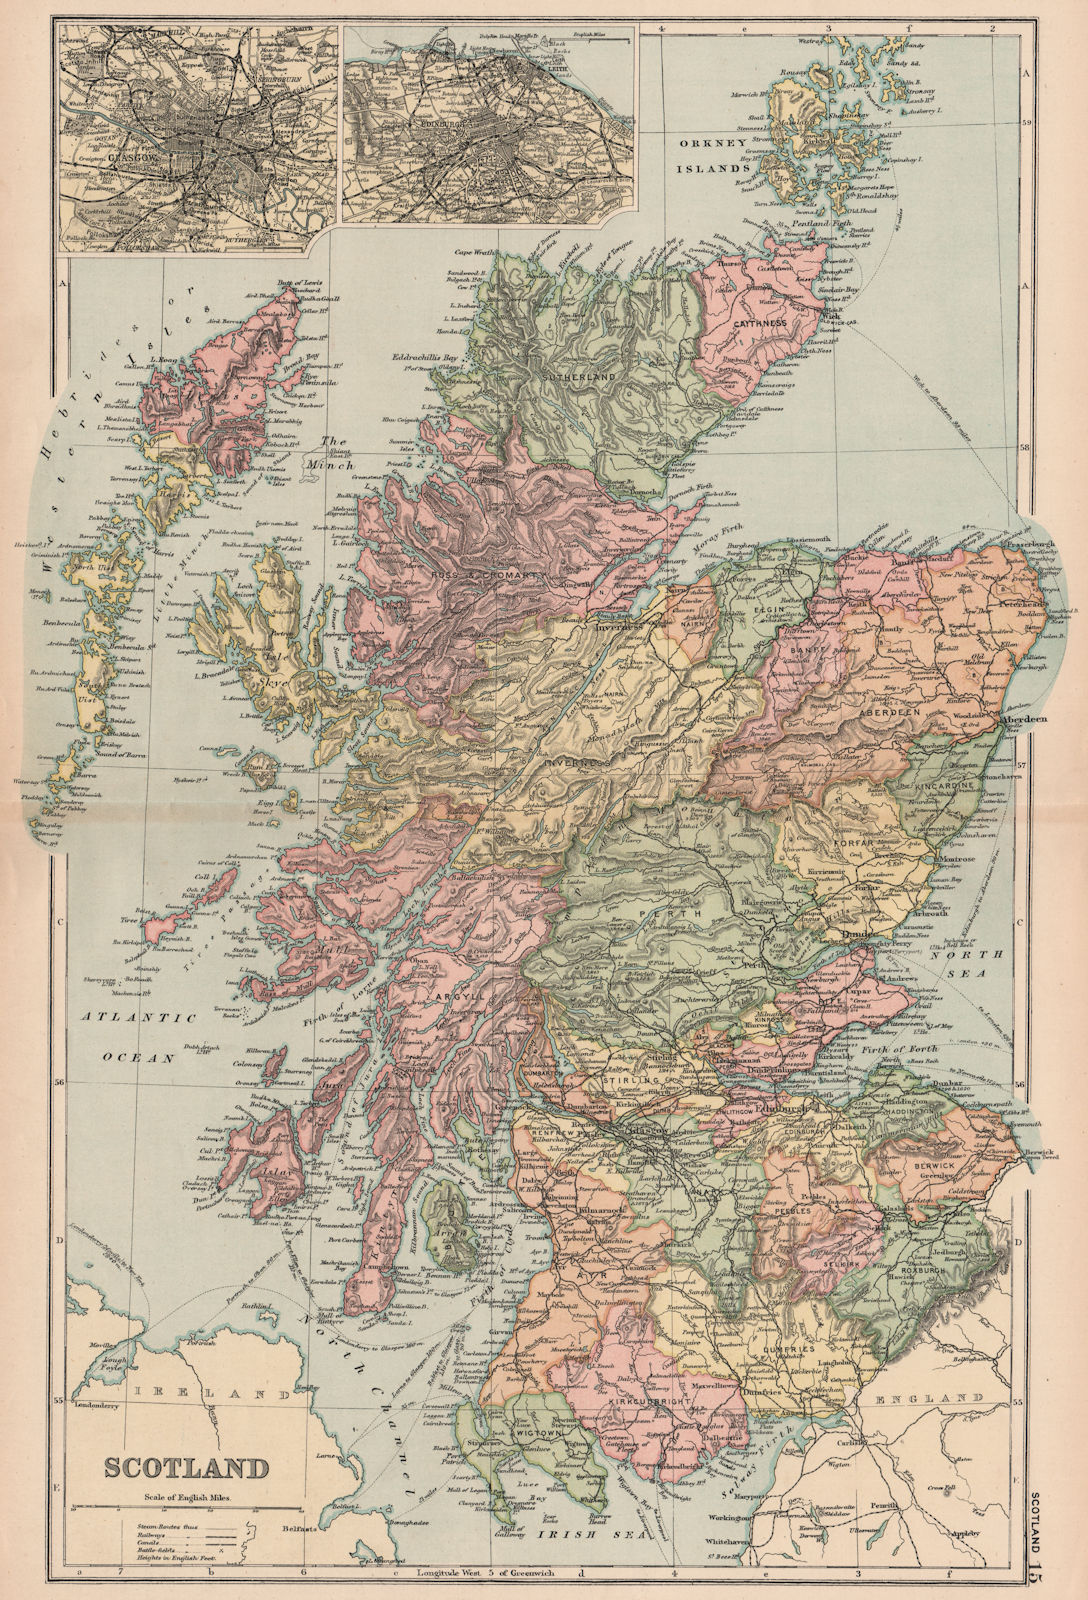 SCOTLAND. Showing counties. inset Glasgow & Edinburgh. BACON 1893 old map